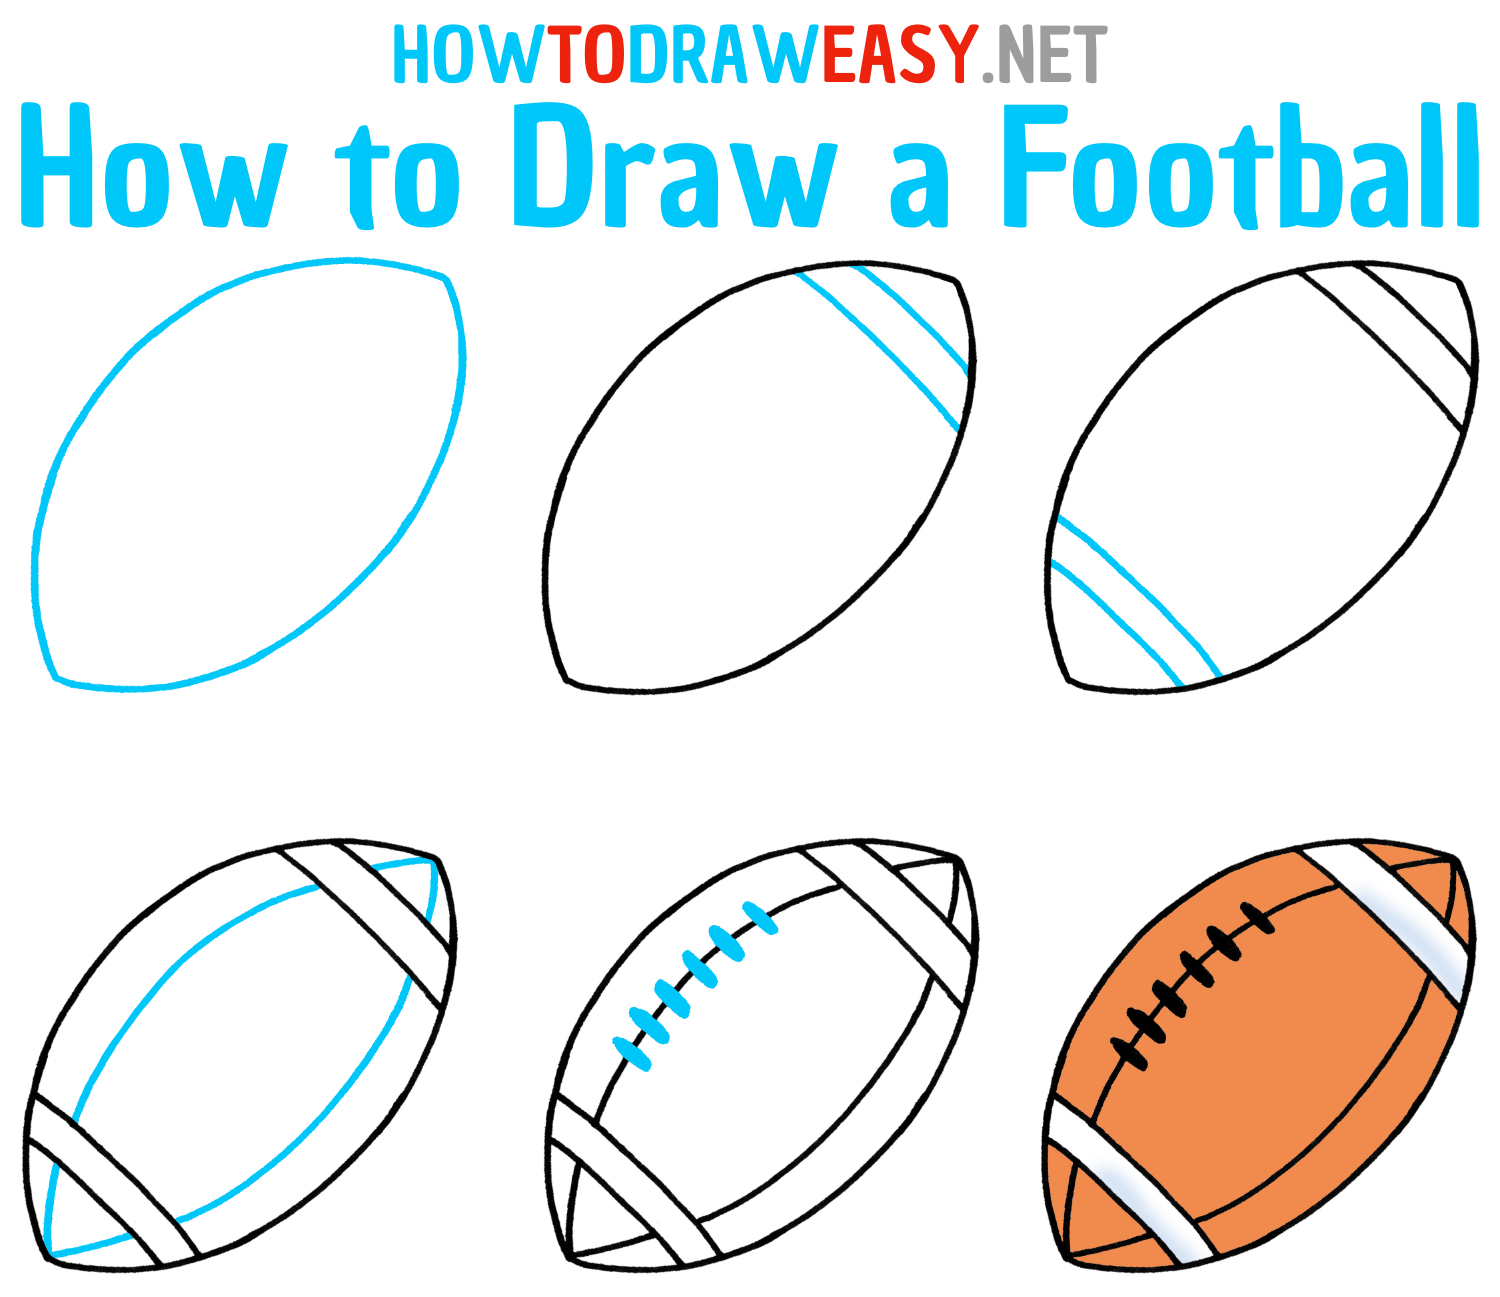 How to Draw a Football Step by Step